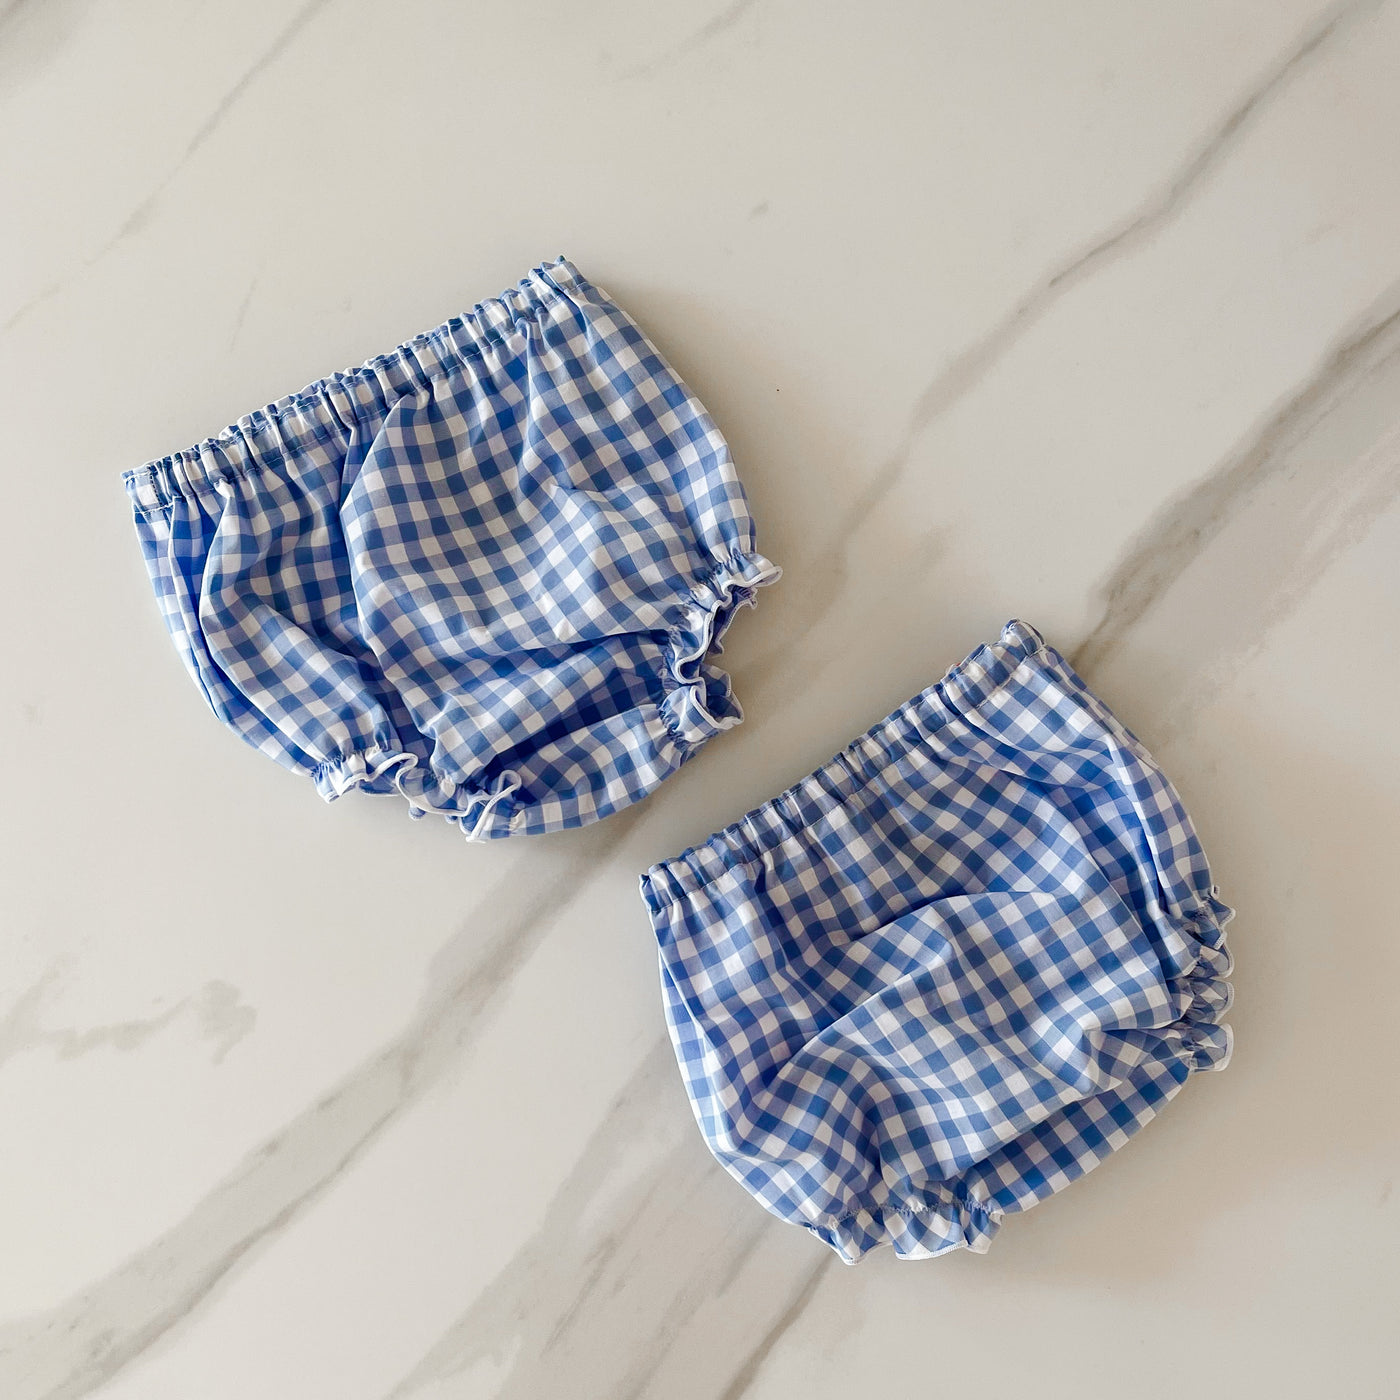 Blue Gingham Bloomers